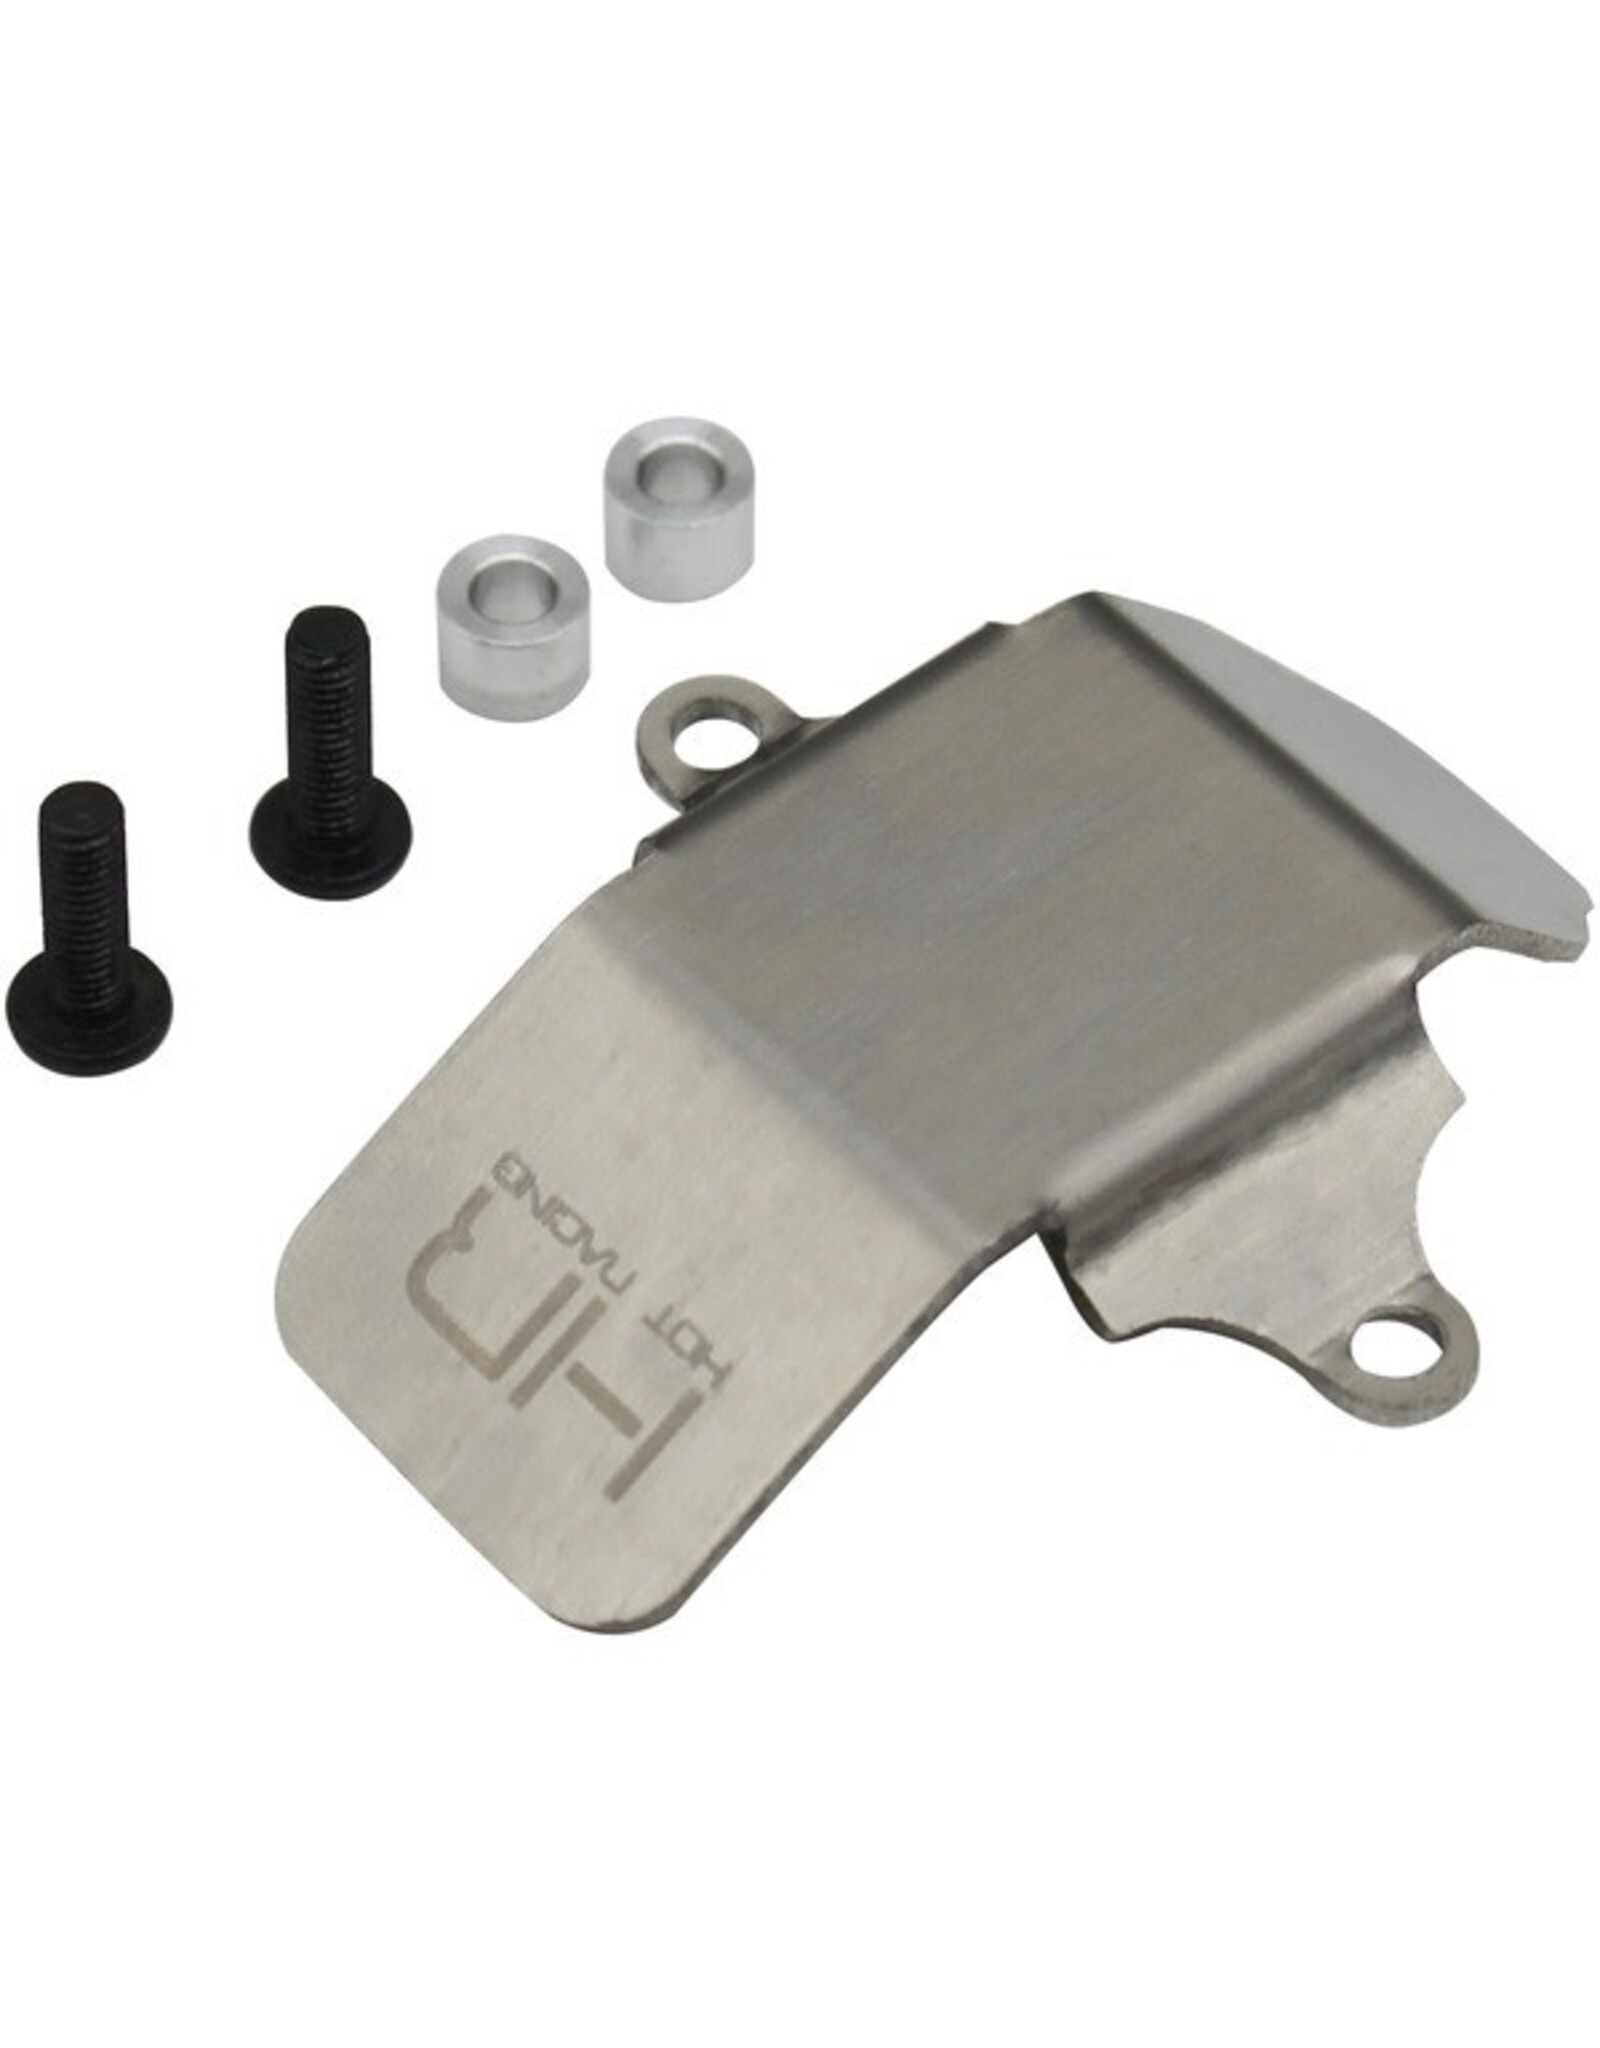 Hot Racing Stainless Armor Skid Plate, for Axial SCX II (1pc)